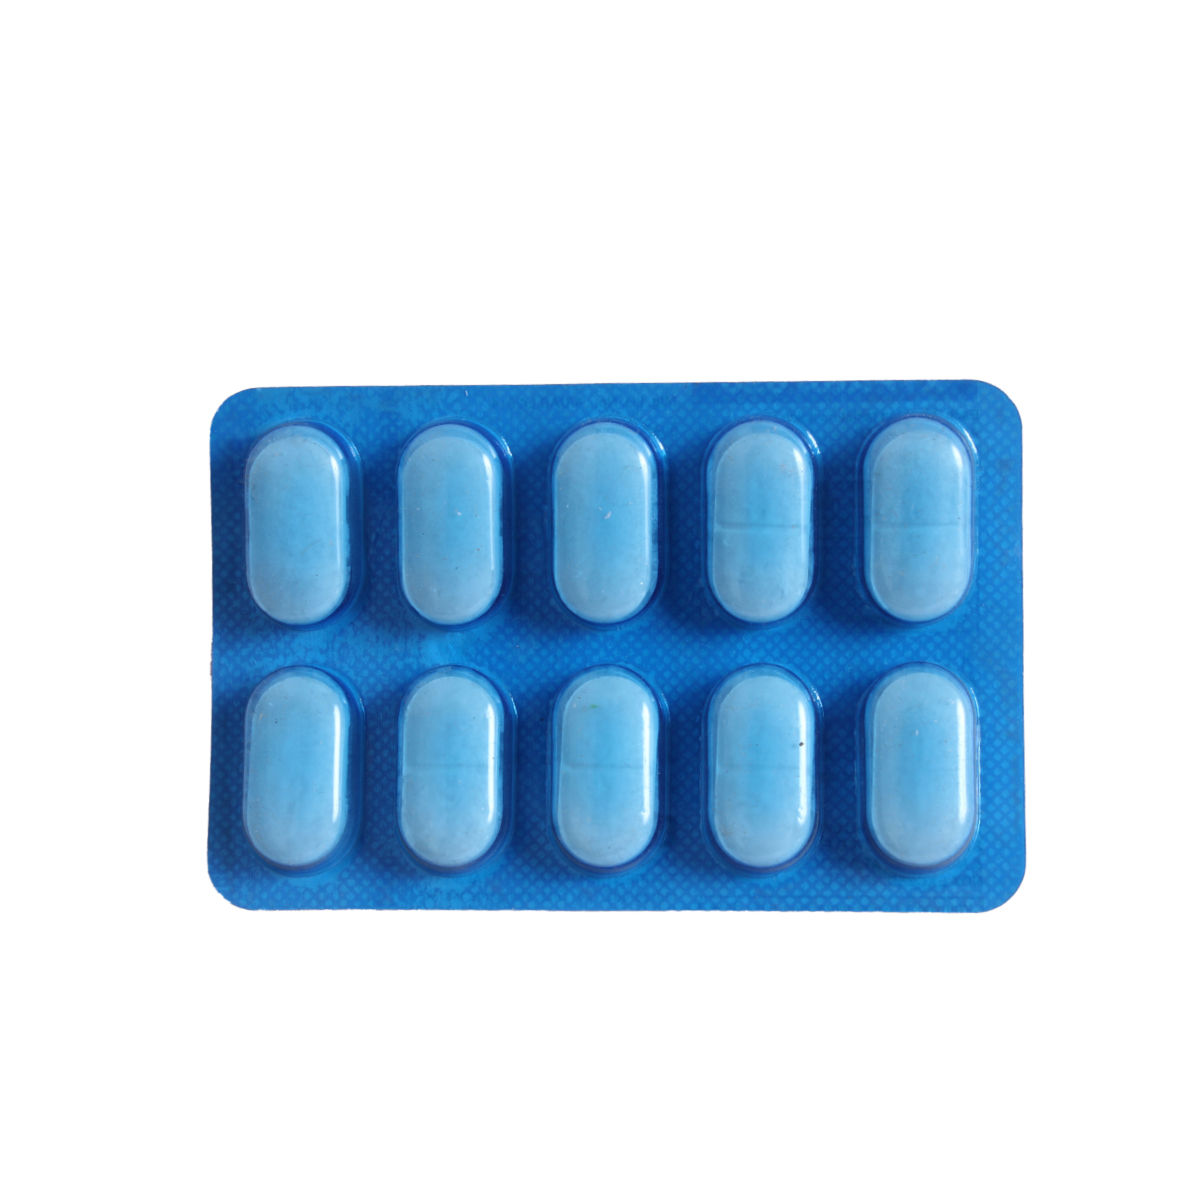 Xtpara 650 mg Tablet 10's, Pack of 10 TabletS